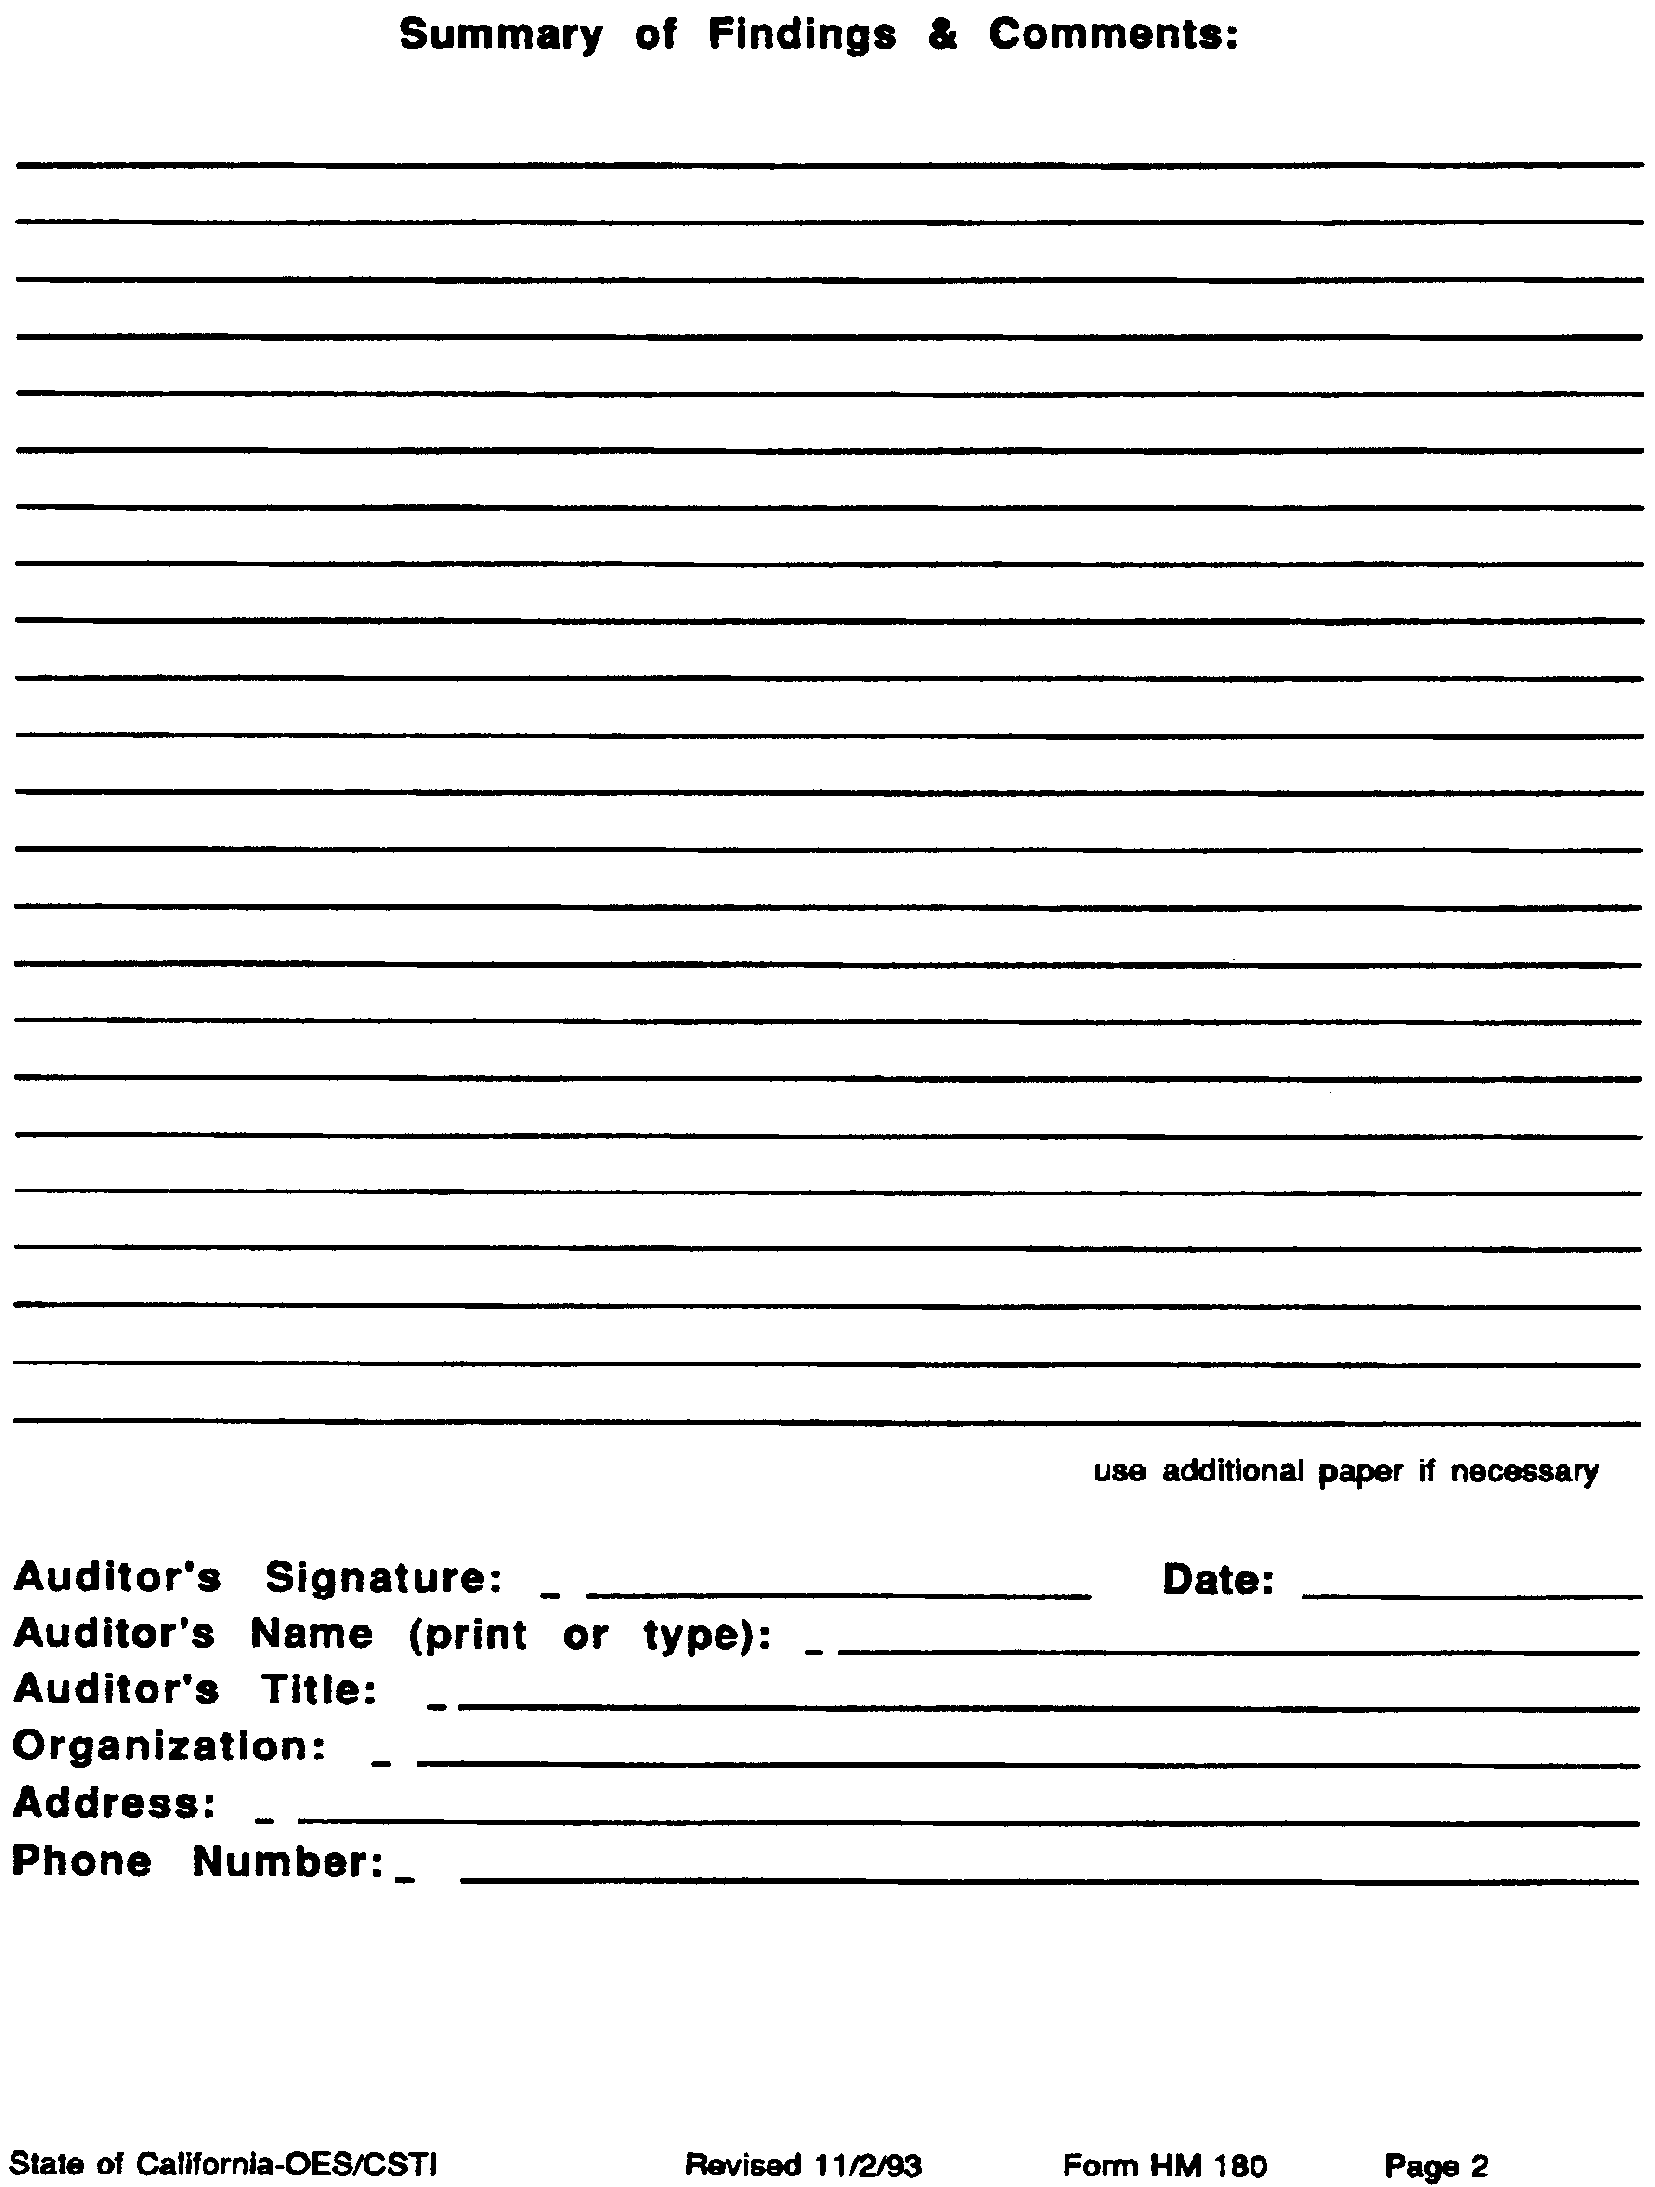 Image 9 within § 2550. Administrative Forms.